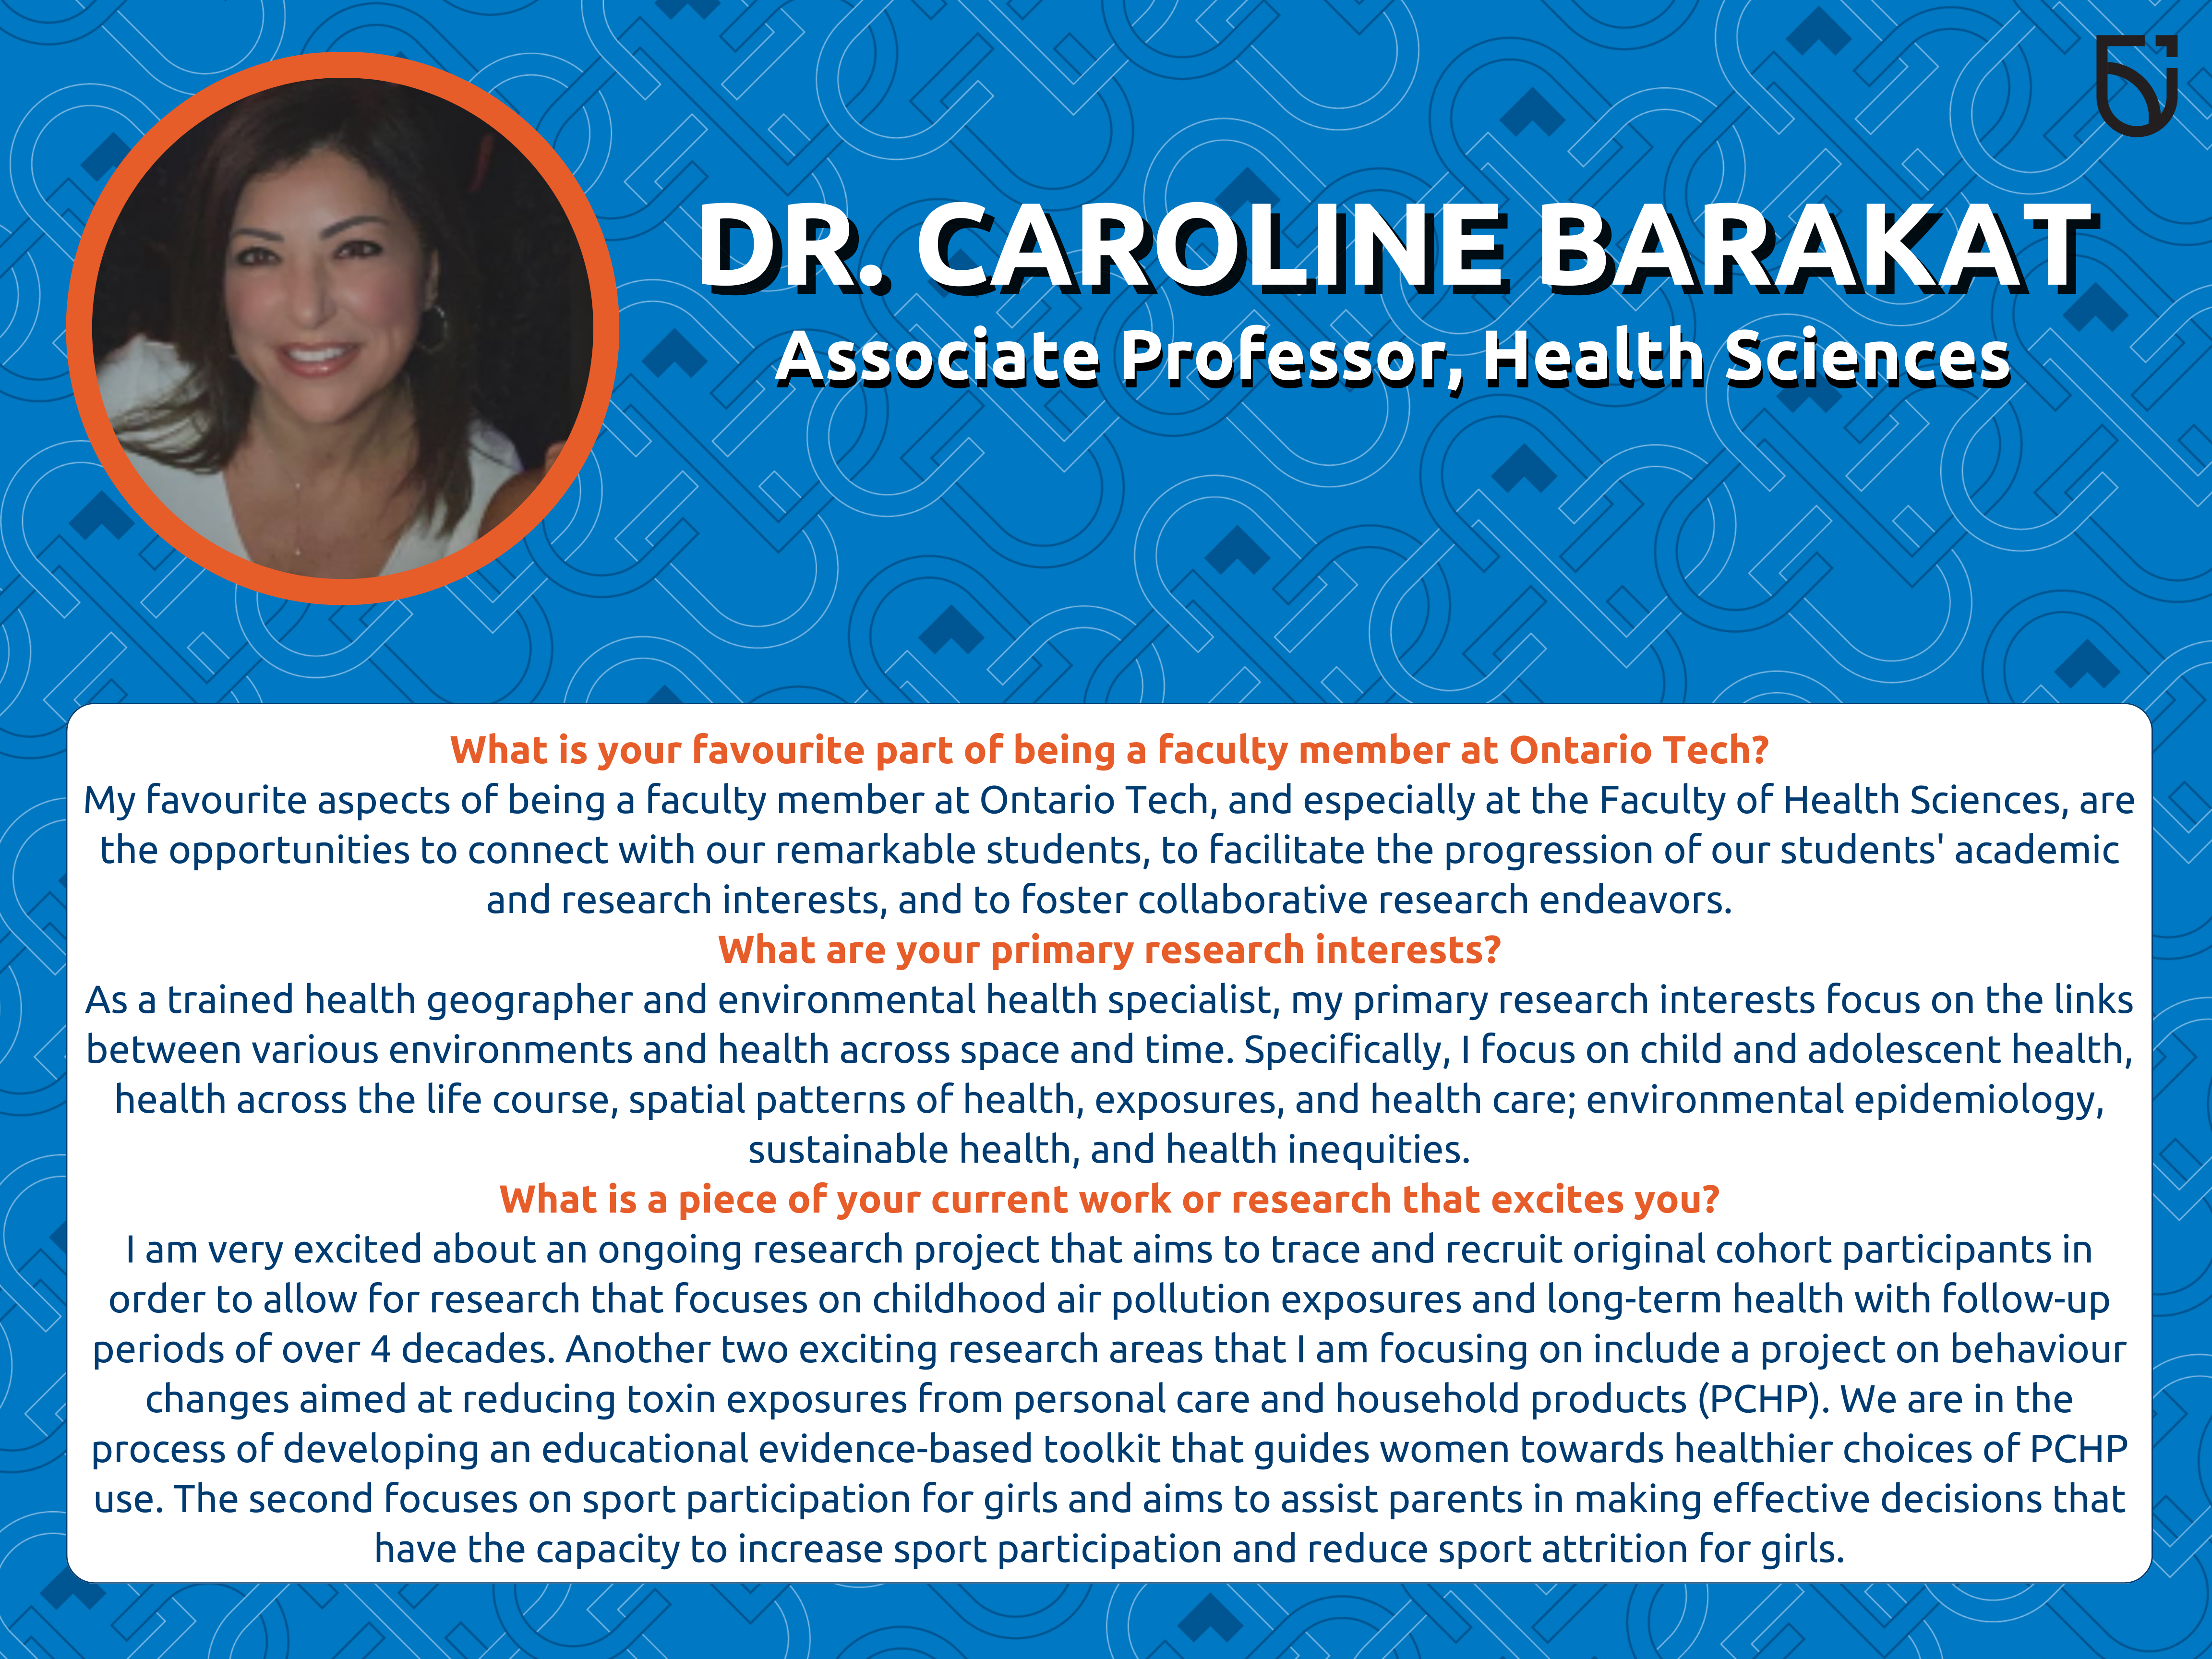 This photo is a Women’s Wednesday feature of Dr. Caroline Barakat, an Associate Professor in the Faculty of Health Sciences